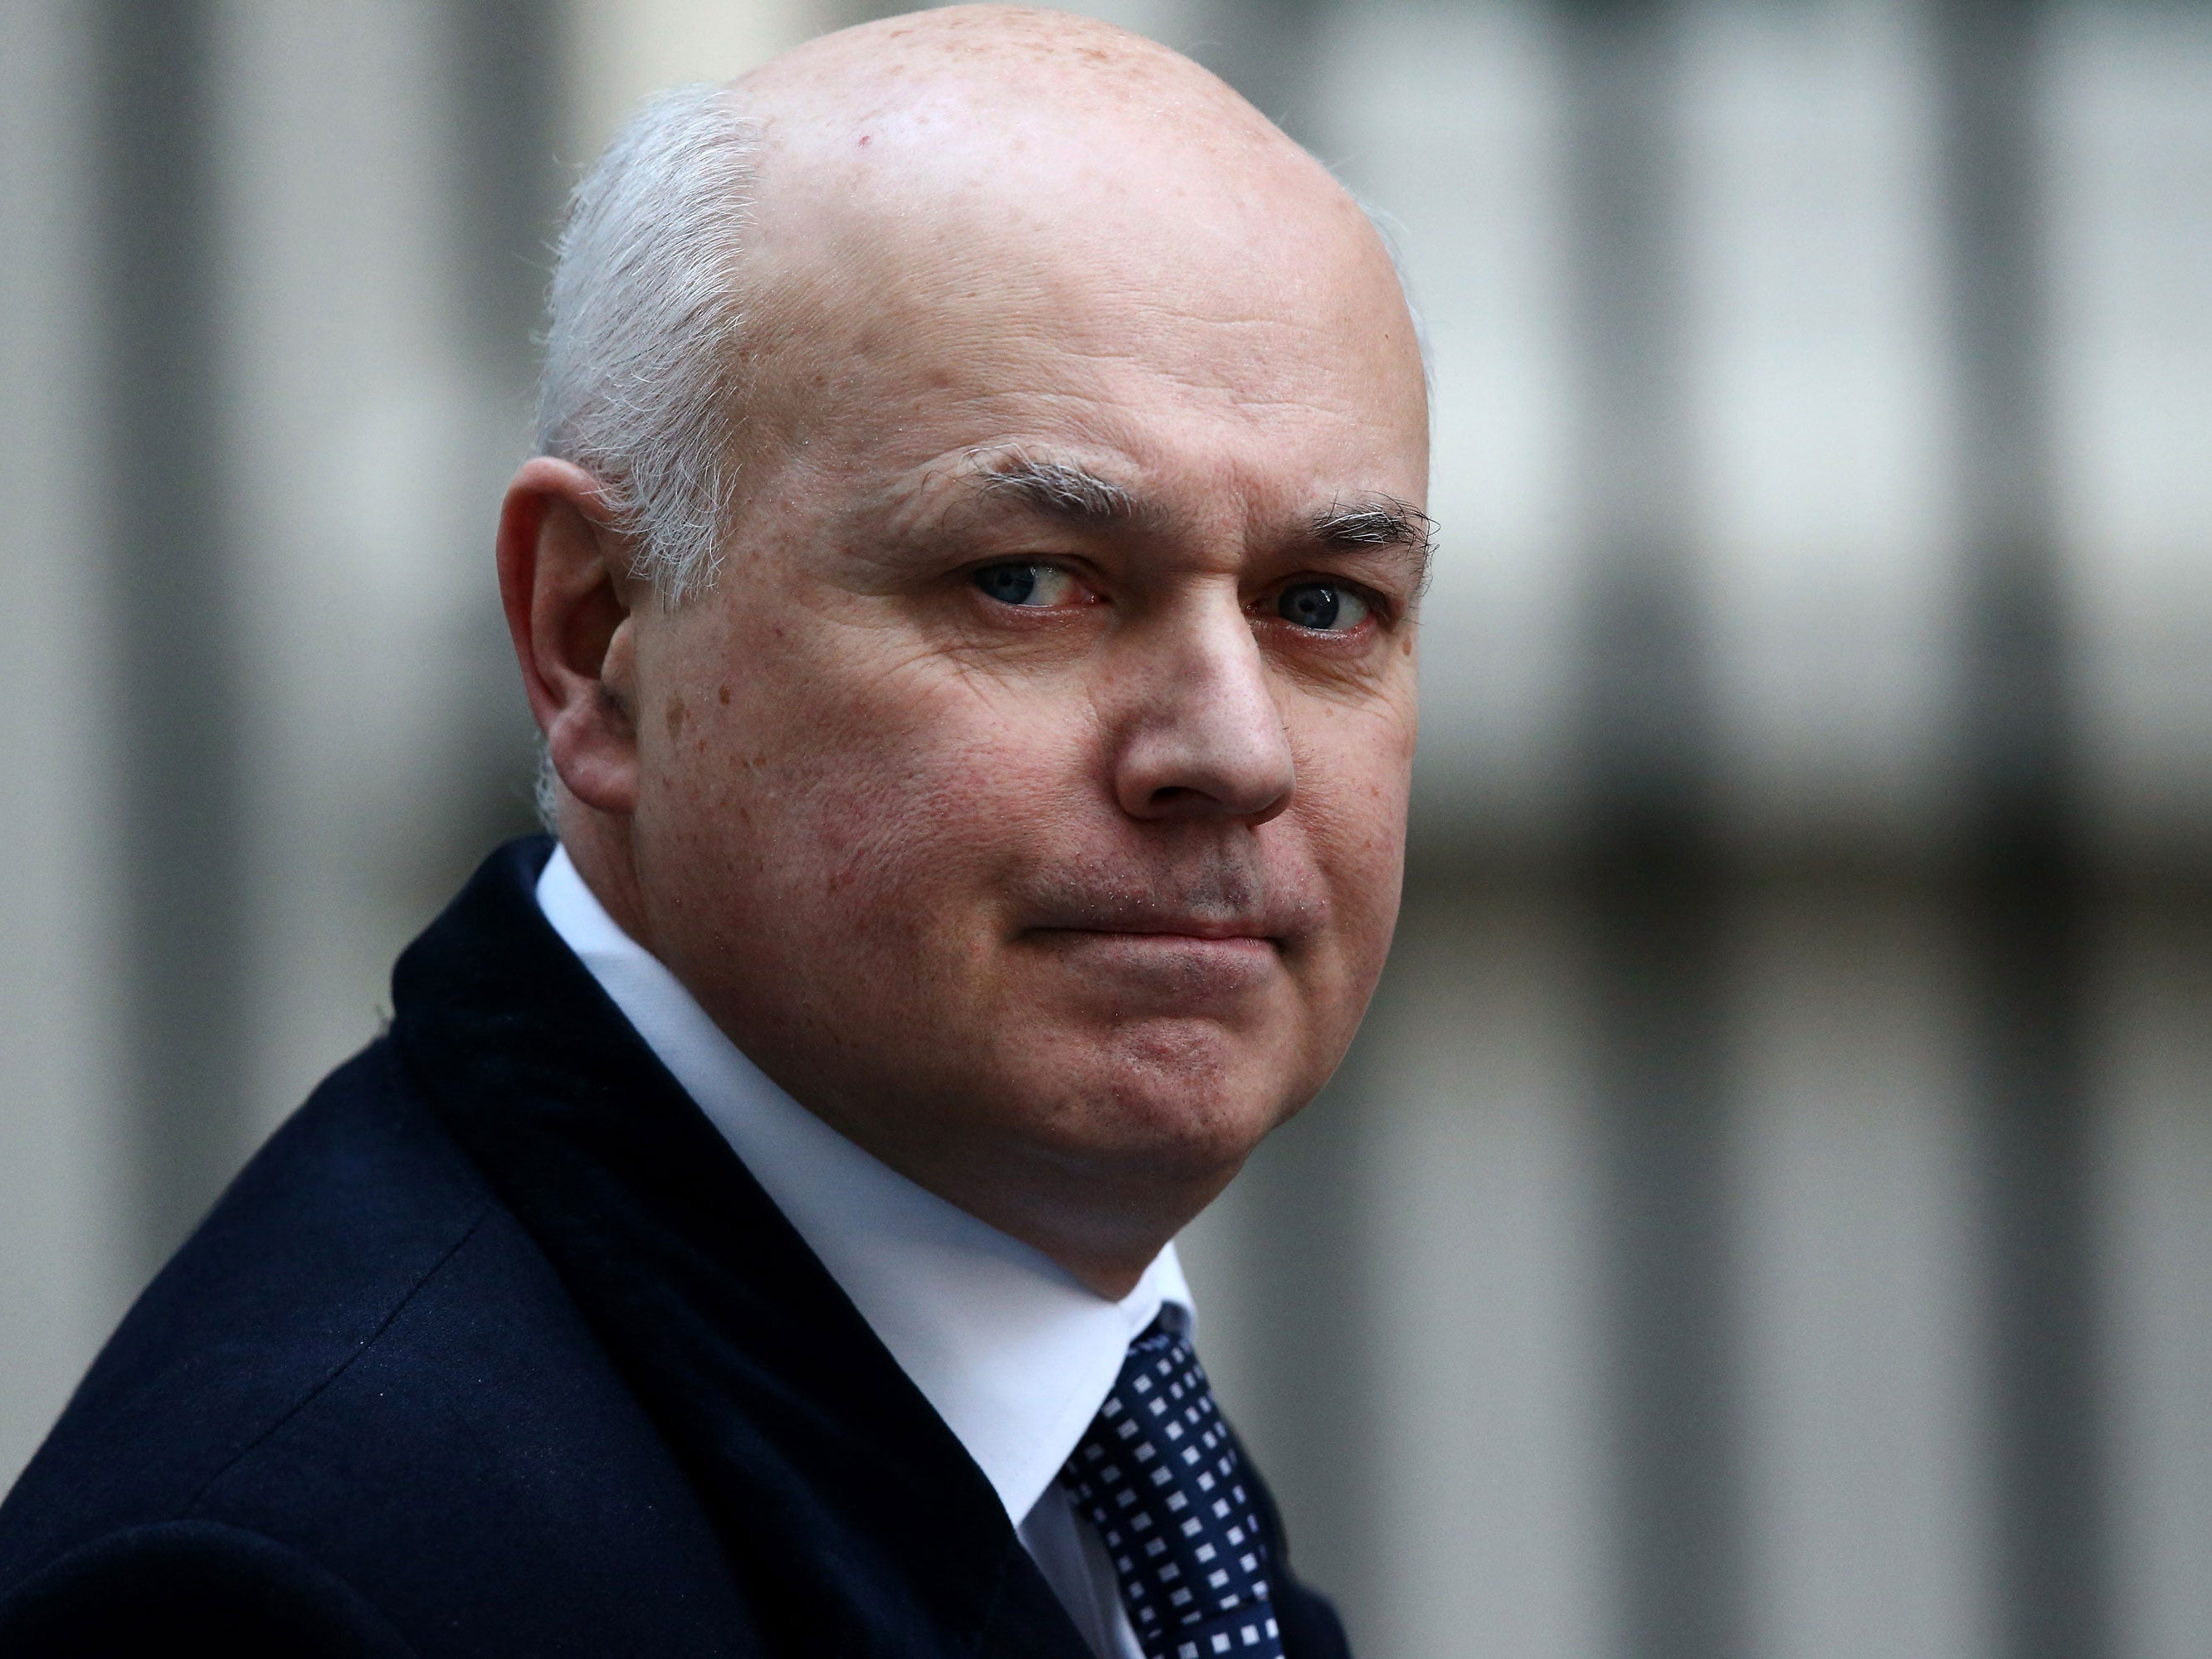 Iain Duncan Smith said the dominance of foreign affairs throughout his leadership meant he was never able to gain traction with voters on domestic issues